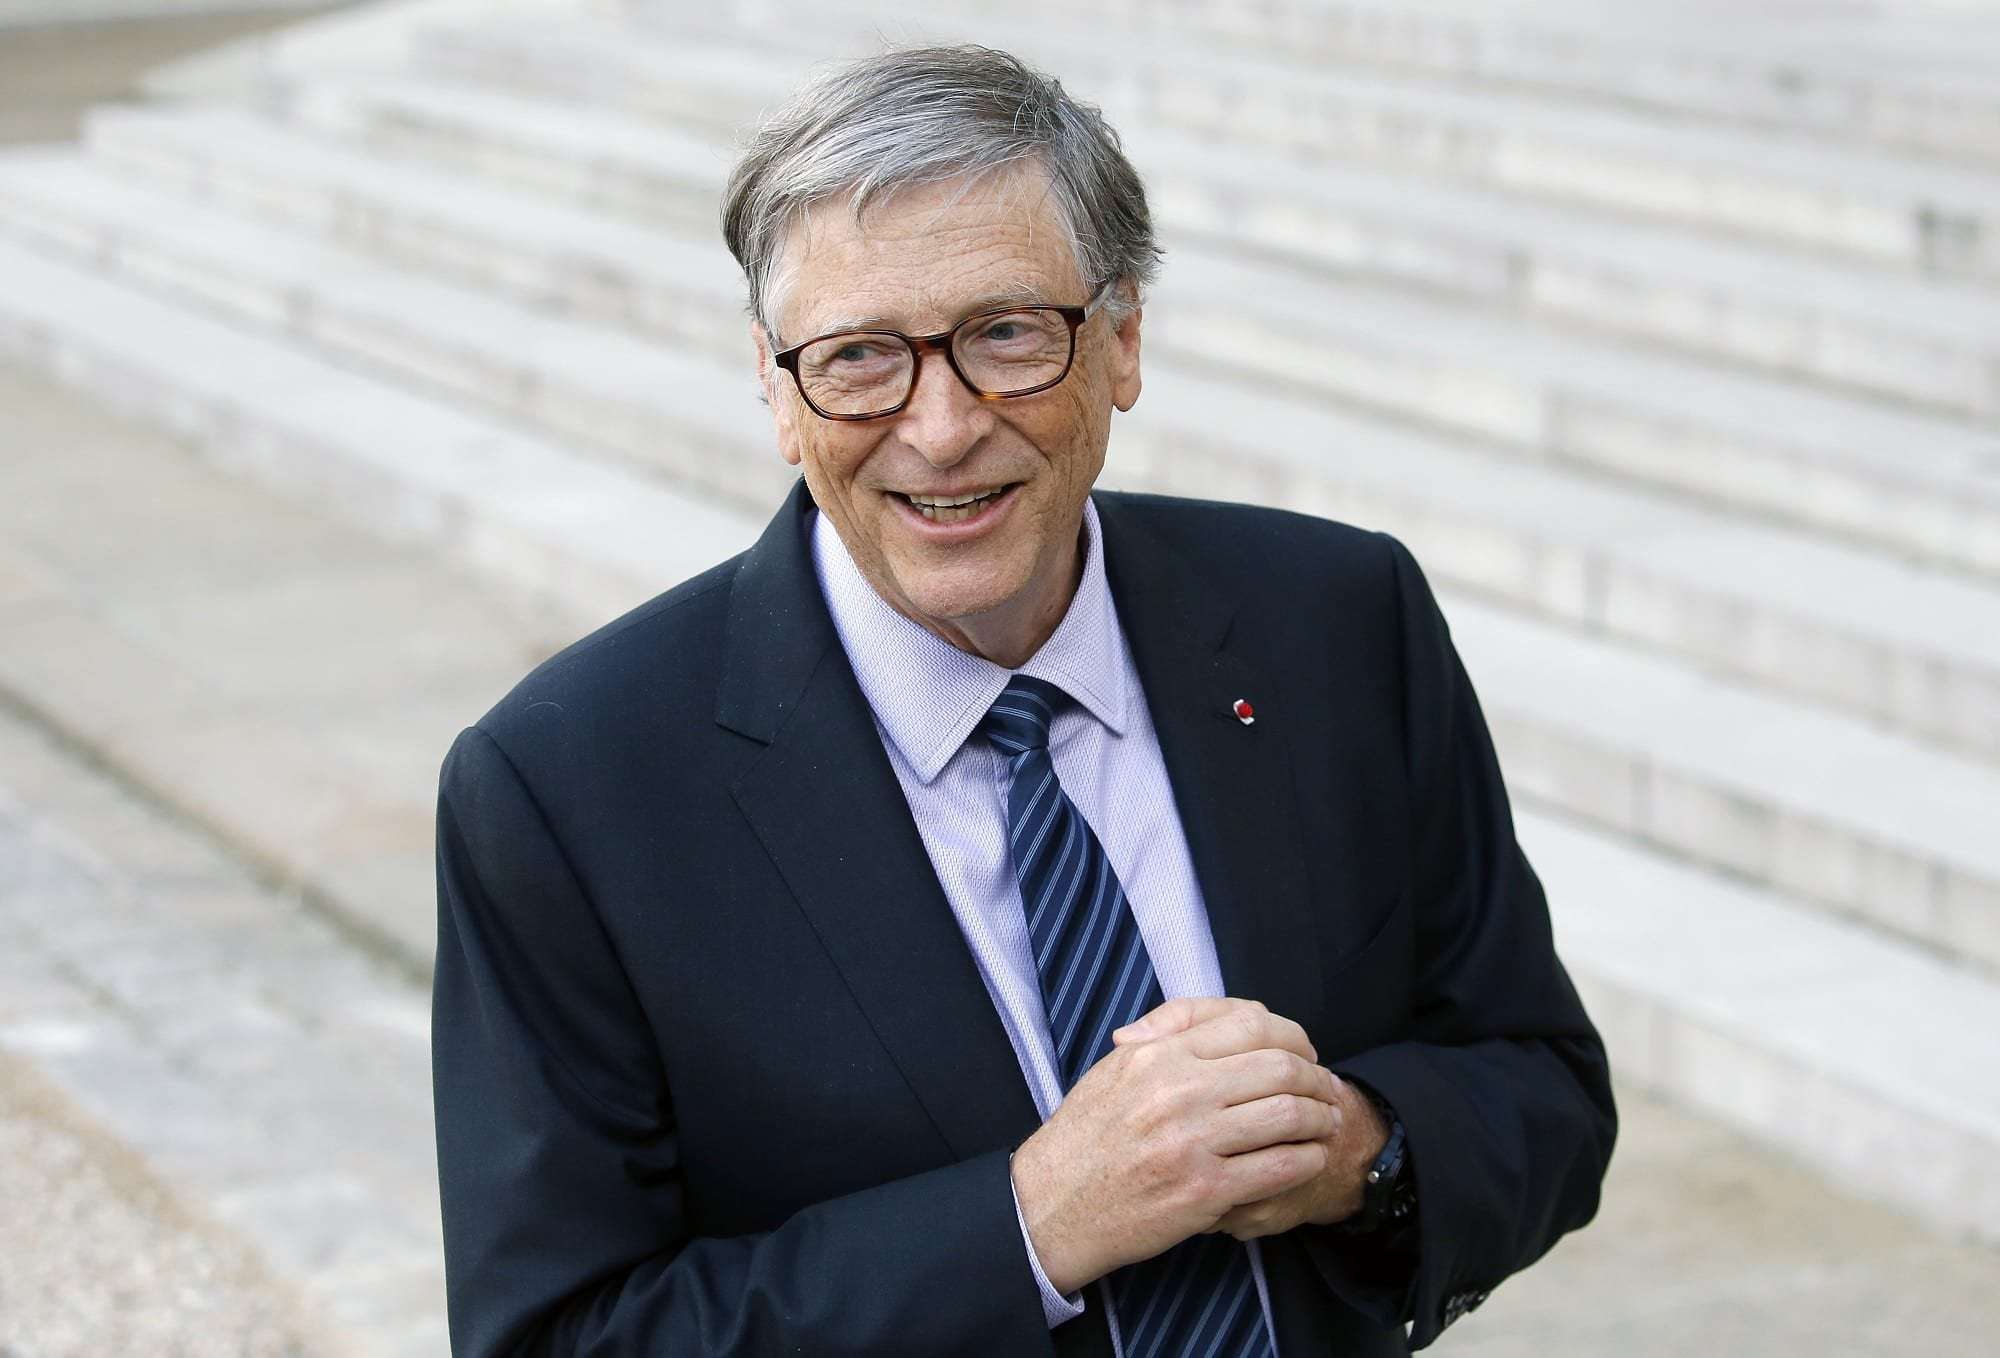 image for Bill Gates gave away $35 billion this year but didn't see his personal net worth drop